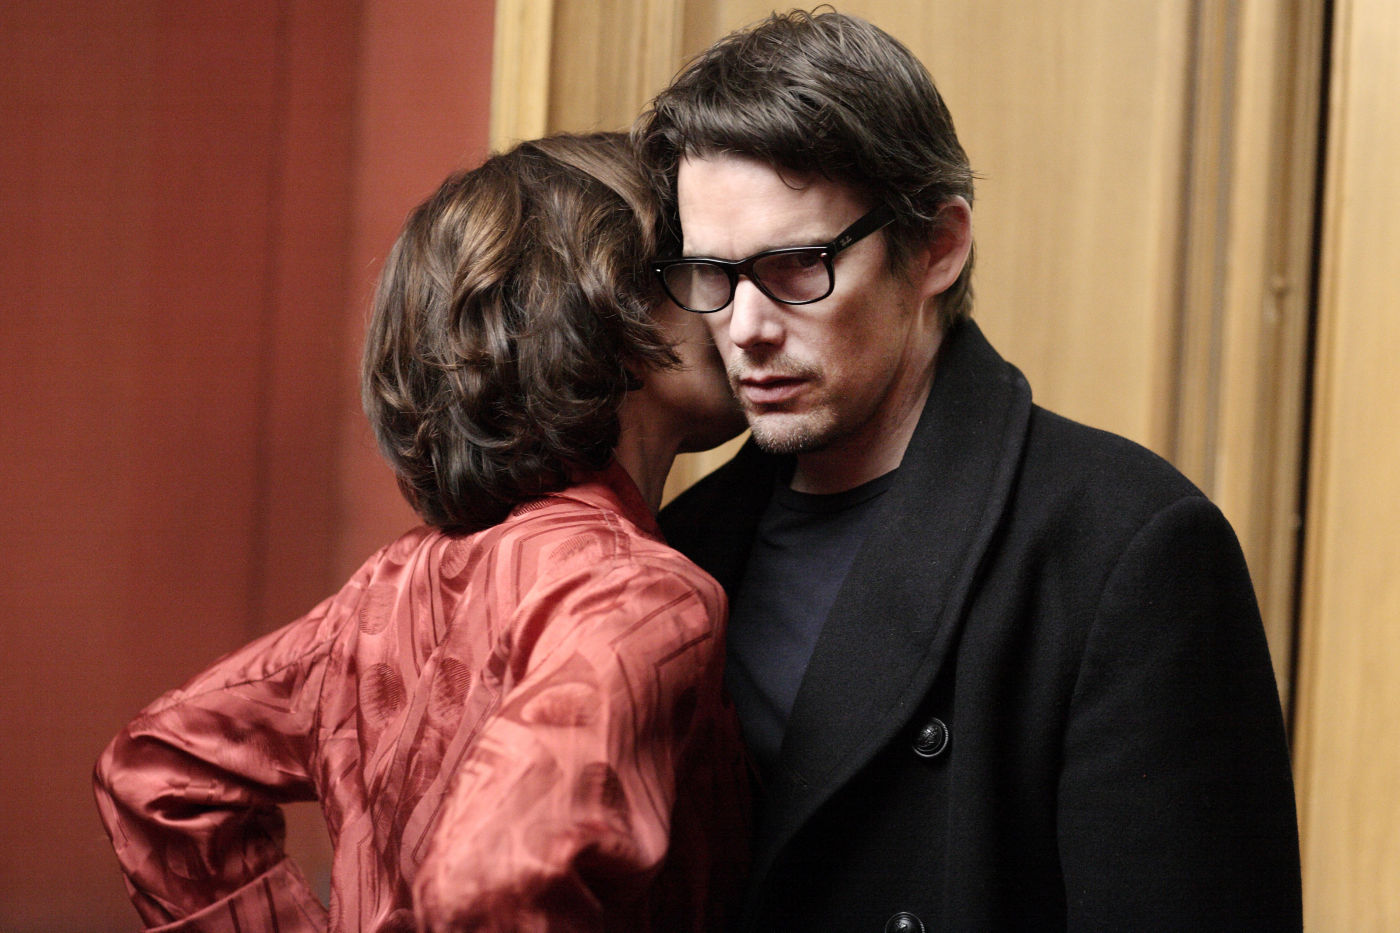 Kristin Scott Thomas stars as Margit and Ethan Hawke stars as Tom Ricks in ATO Pictures' The Woman in the Fifth (2012)